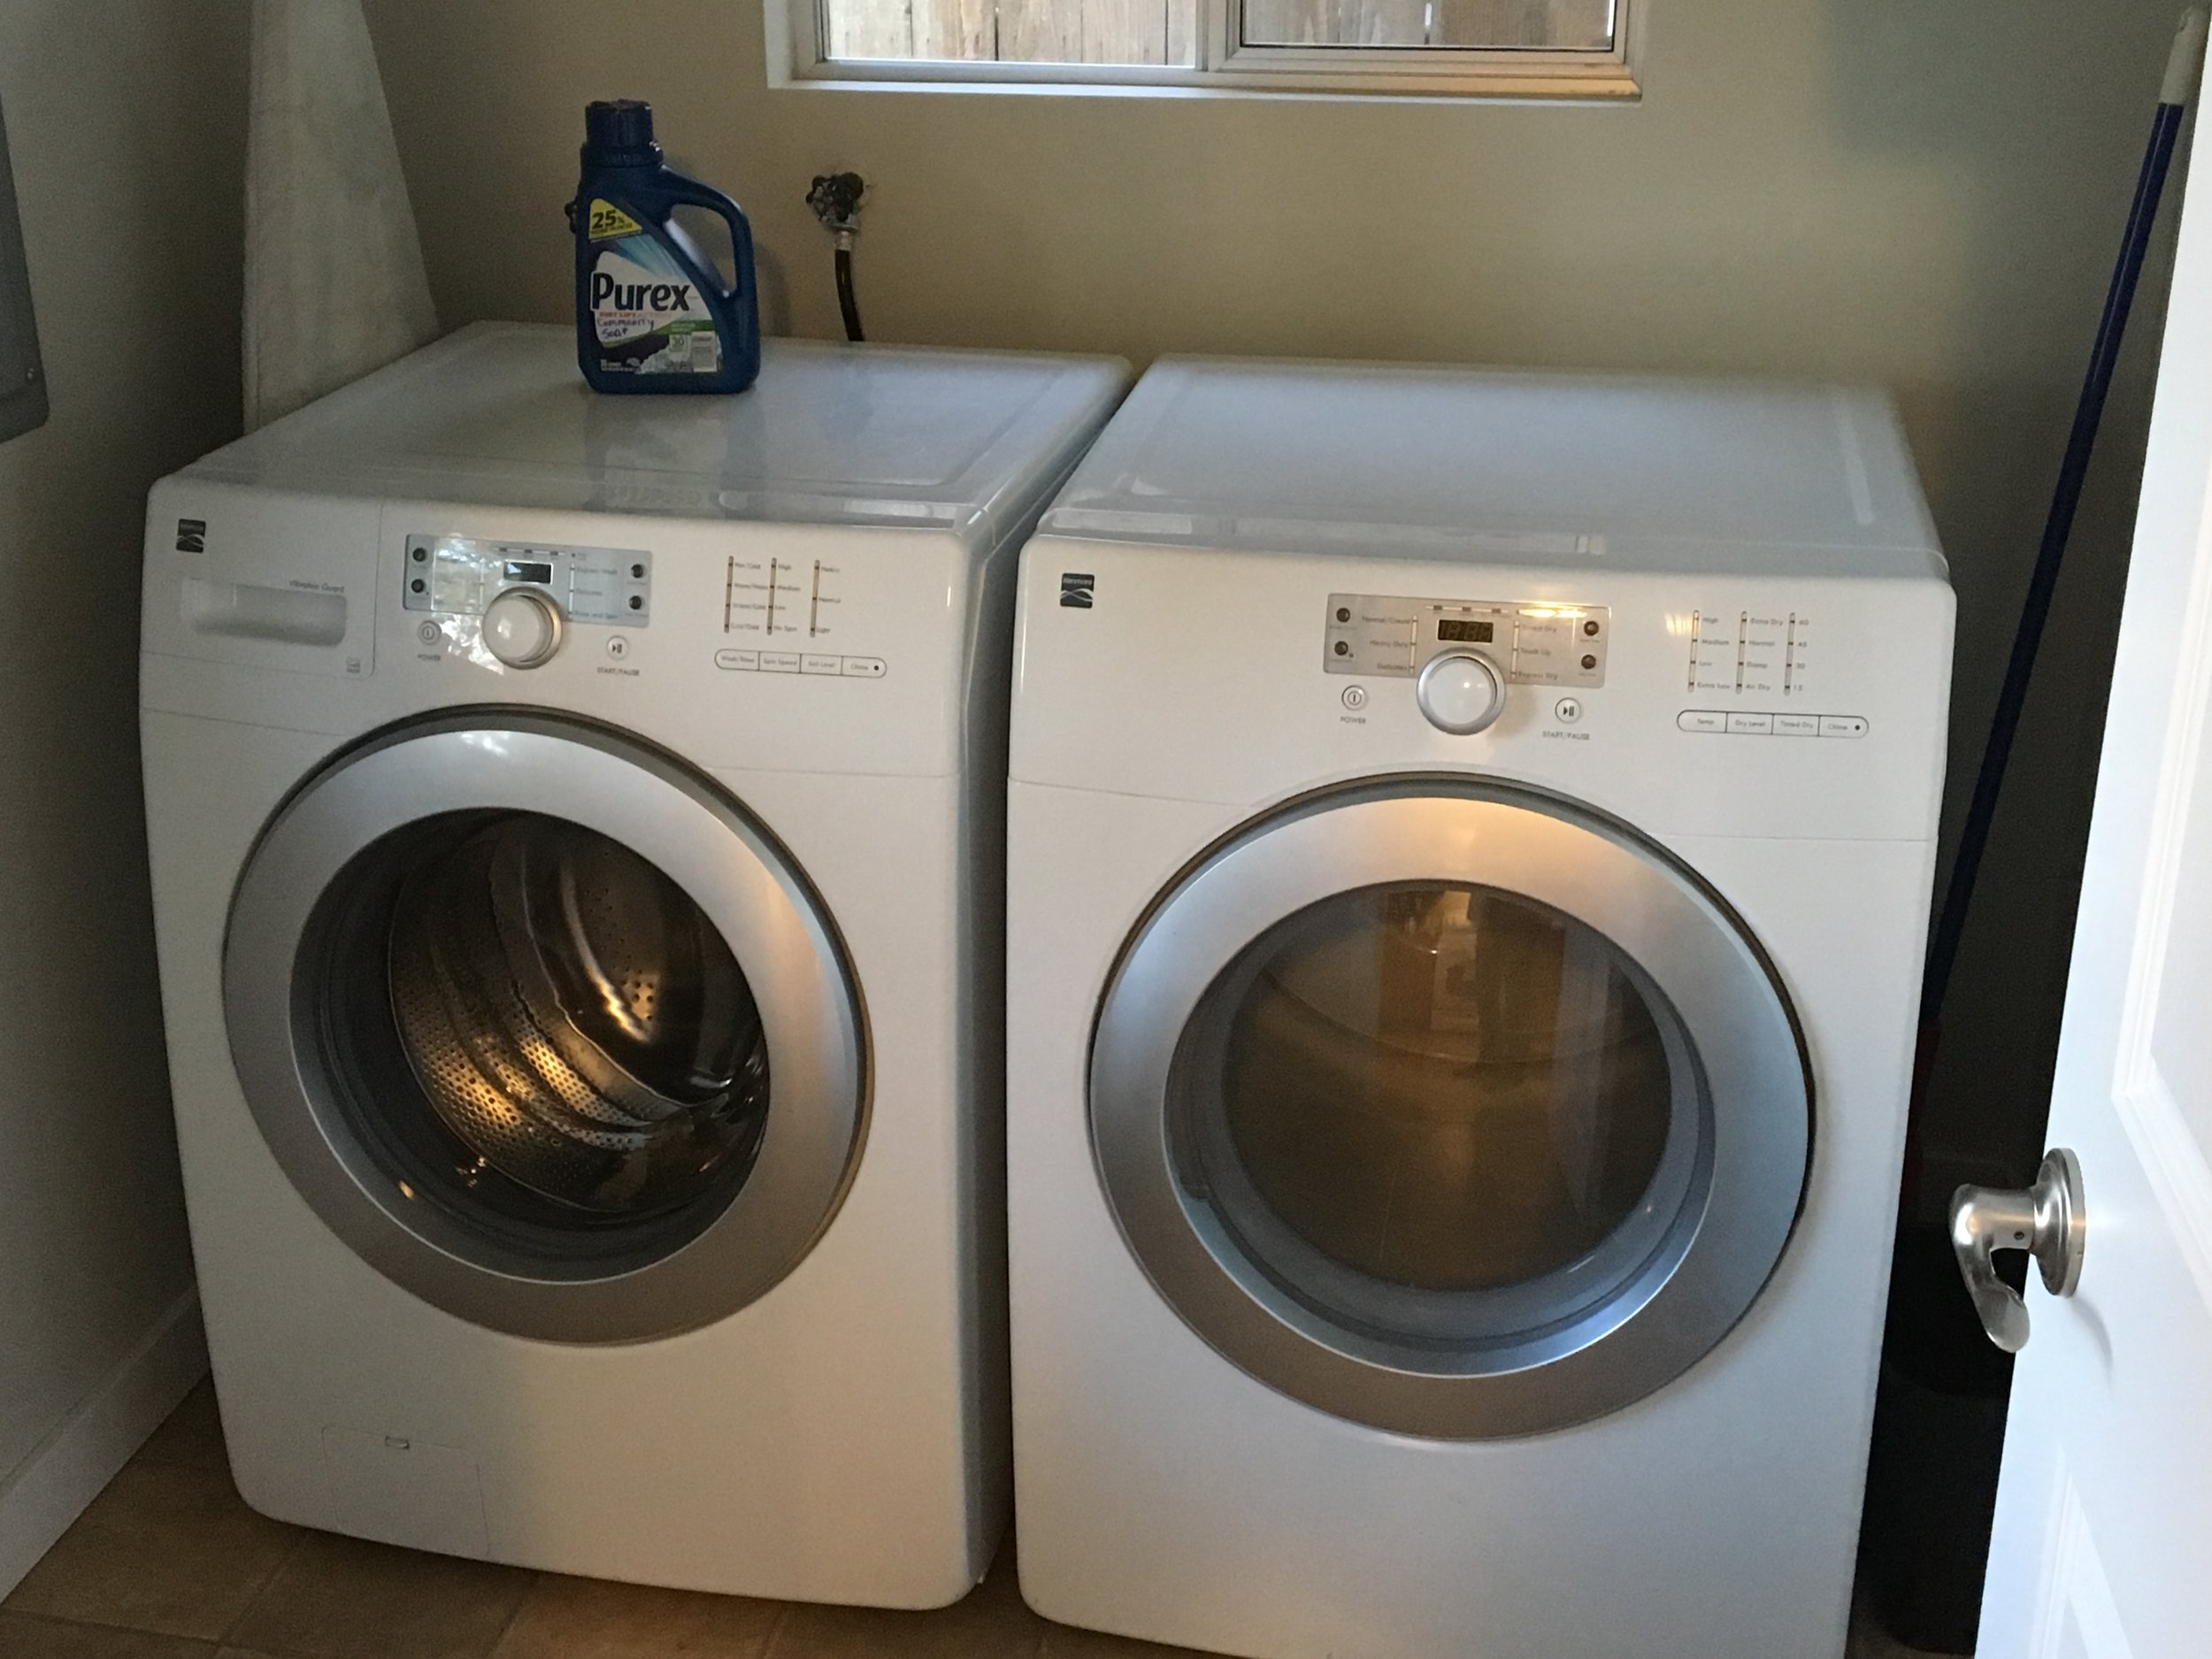 Washer and dryer in home.